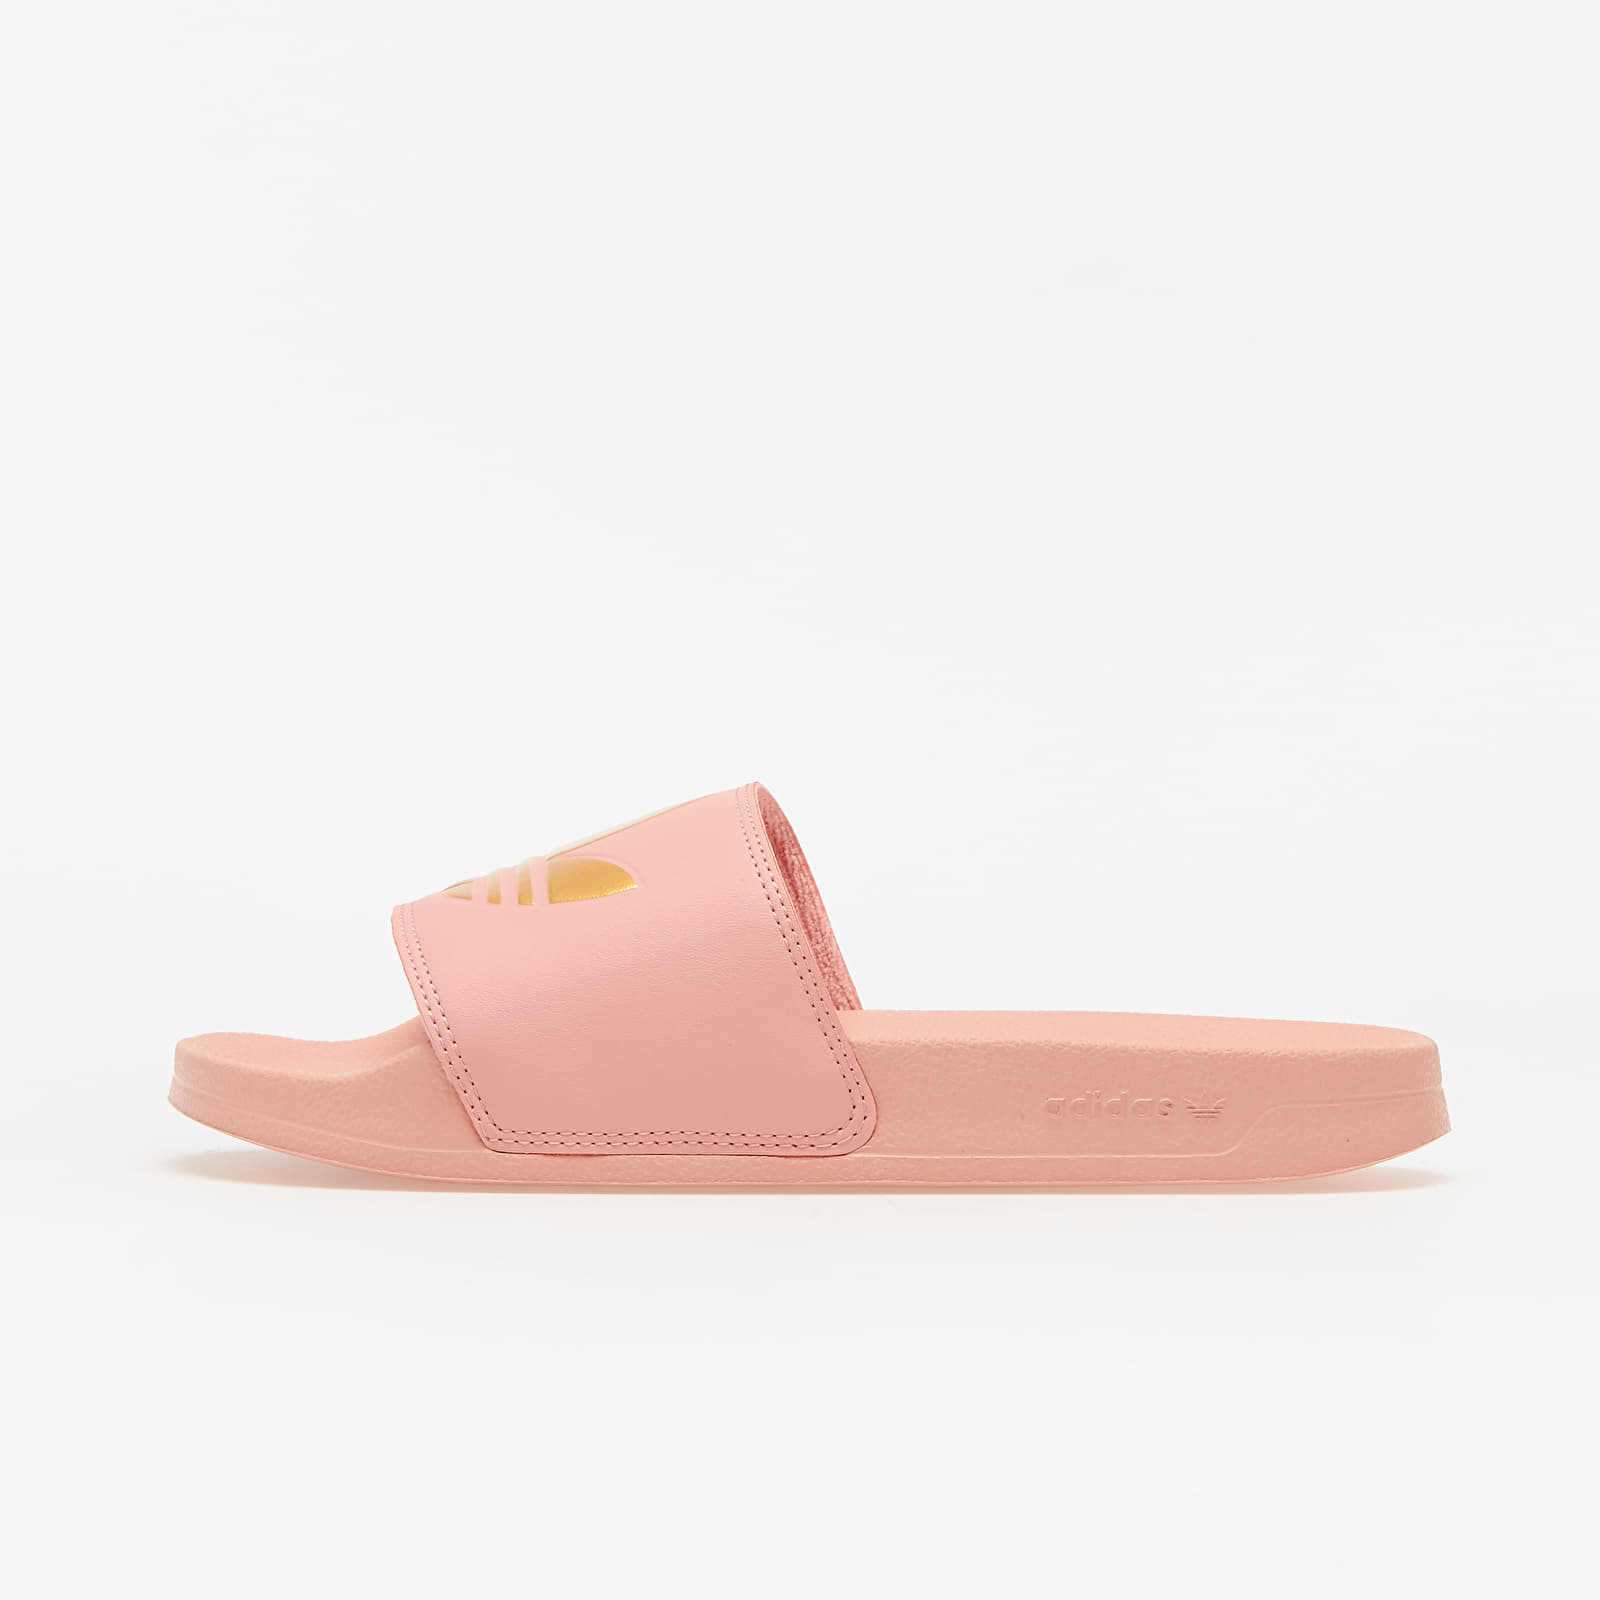 adidas Adilette Lite W Trace Pink/ Gold Metalic/ Trace Pink FW0543